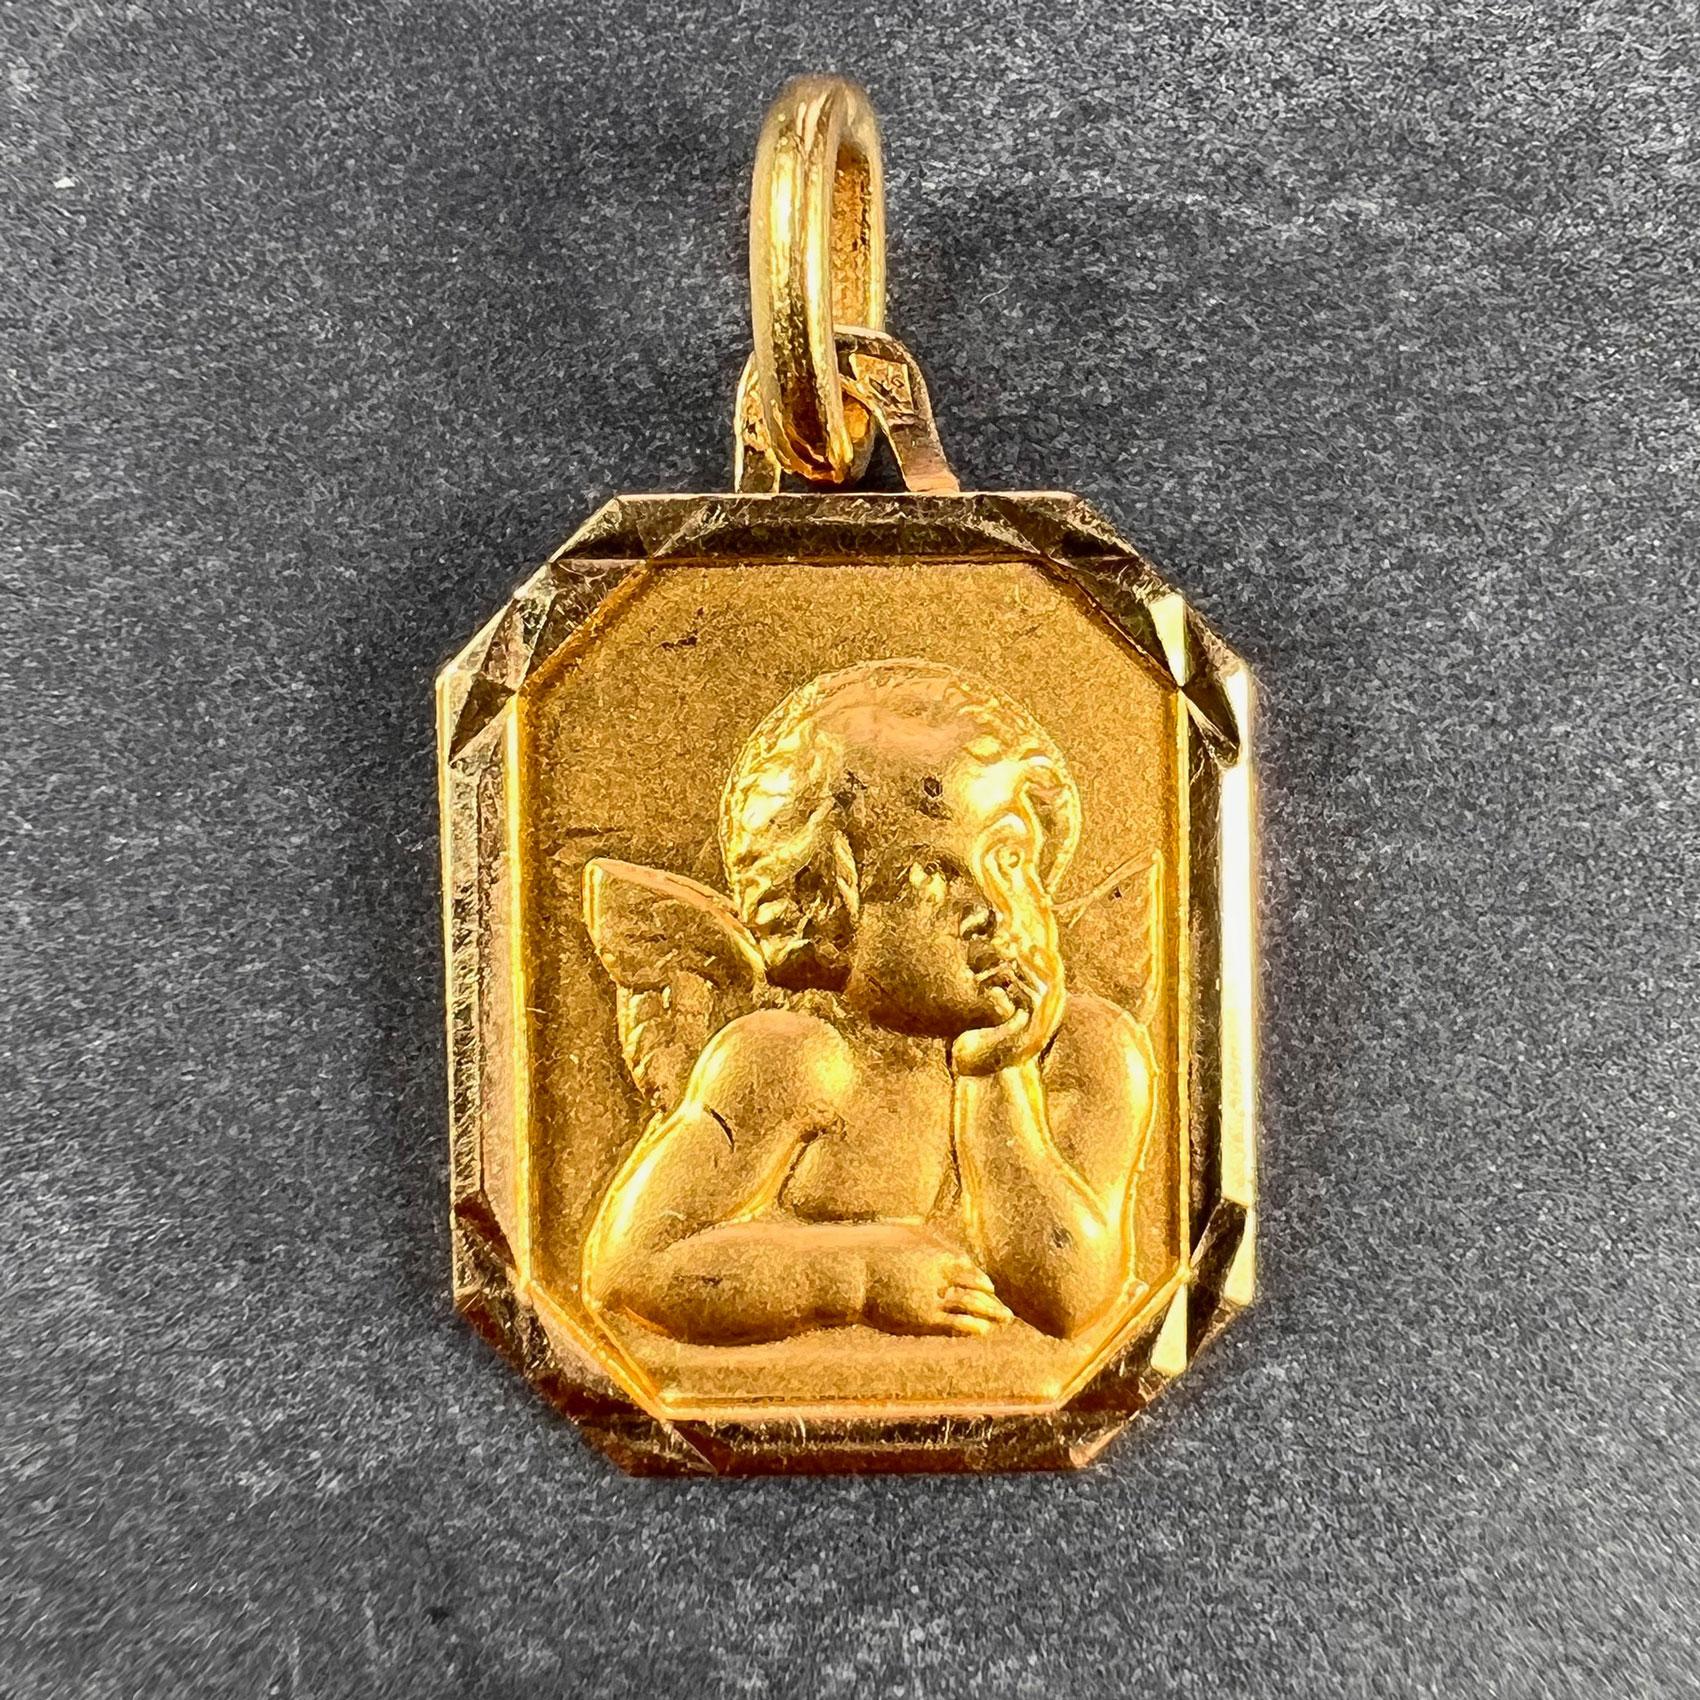 A French 18 karat (18K) yellow gold charm pendant designed as a rectangular medal depicting Rafael’s cherub within a faceted frame. Stamped with the eagle mark for 18 karat gold and French manufacture with an unknown maker's mark.  

Dimensions: 1.9